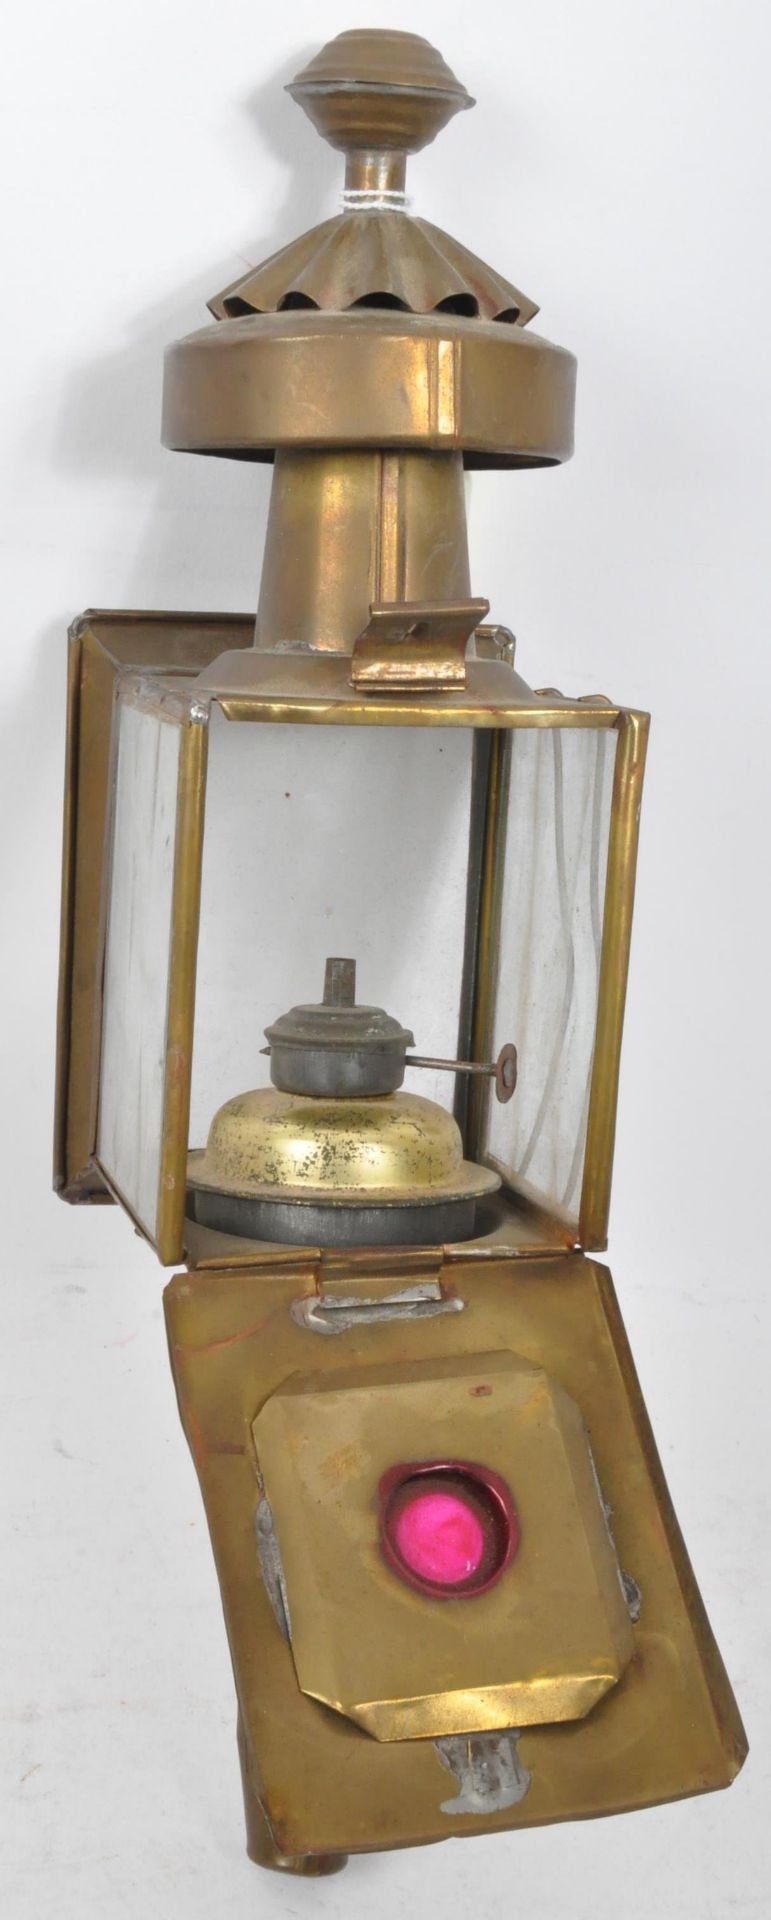 PAIR OF 19TH CENTURY BRASS CARRIAGE LAMPS - Image 7 of 7